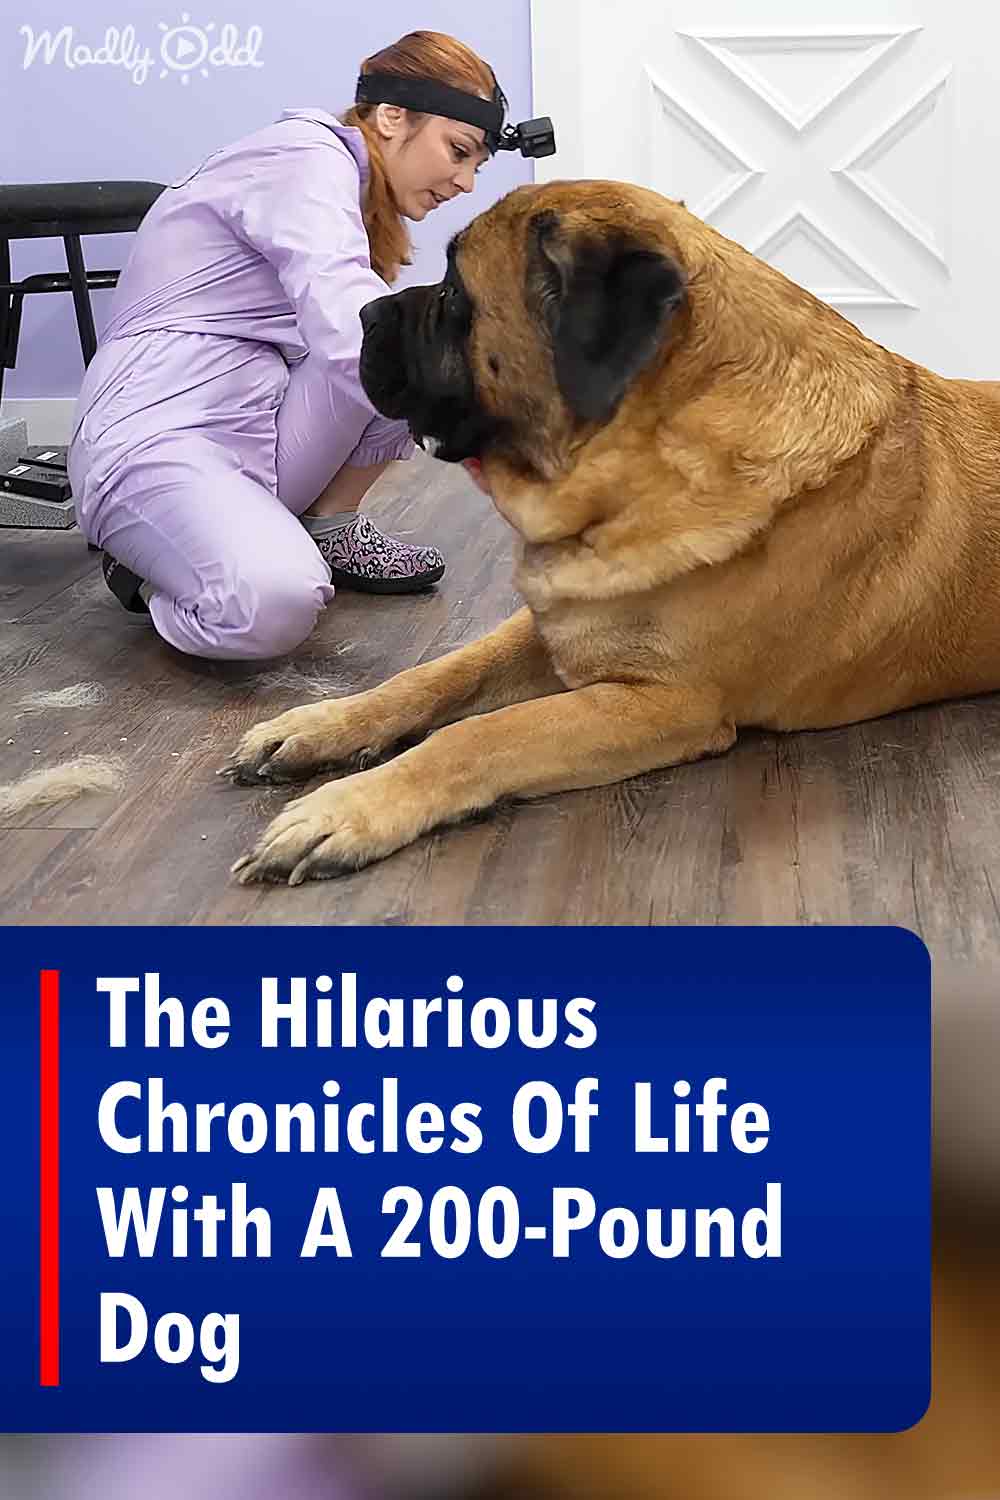 The Hilarious Chronicles Of Life With A 200-Pound Dog